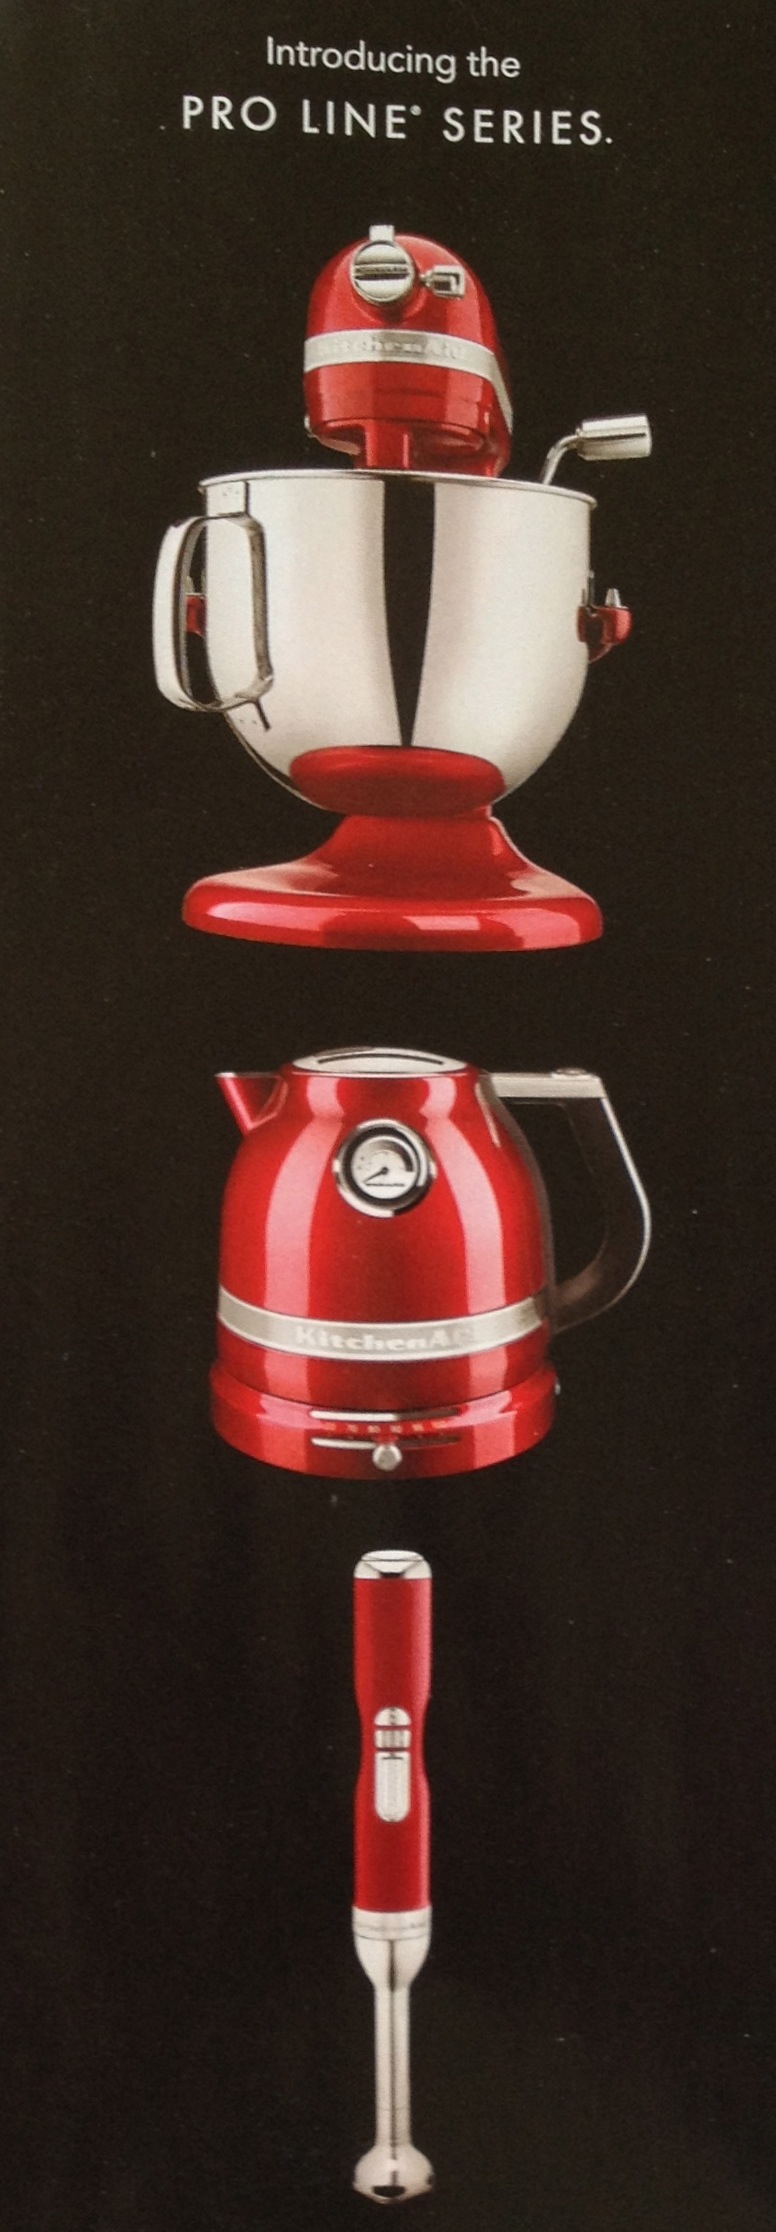 Strip ad of Kitchen Aid appliances in shiny red.